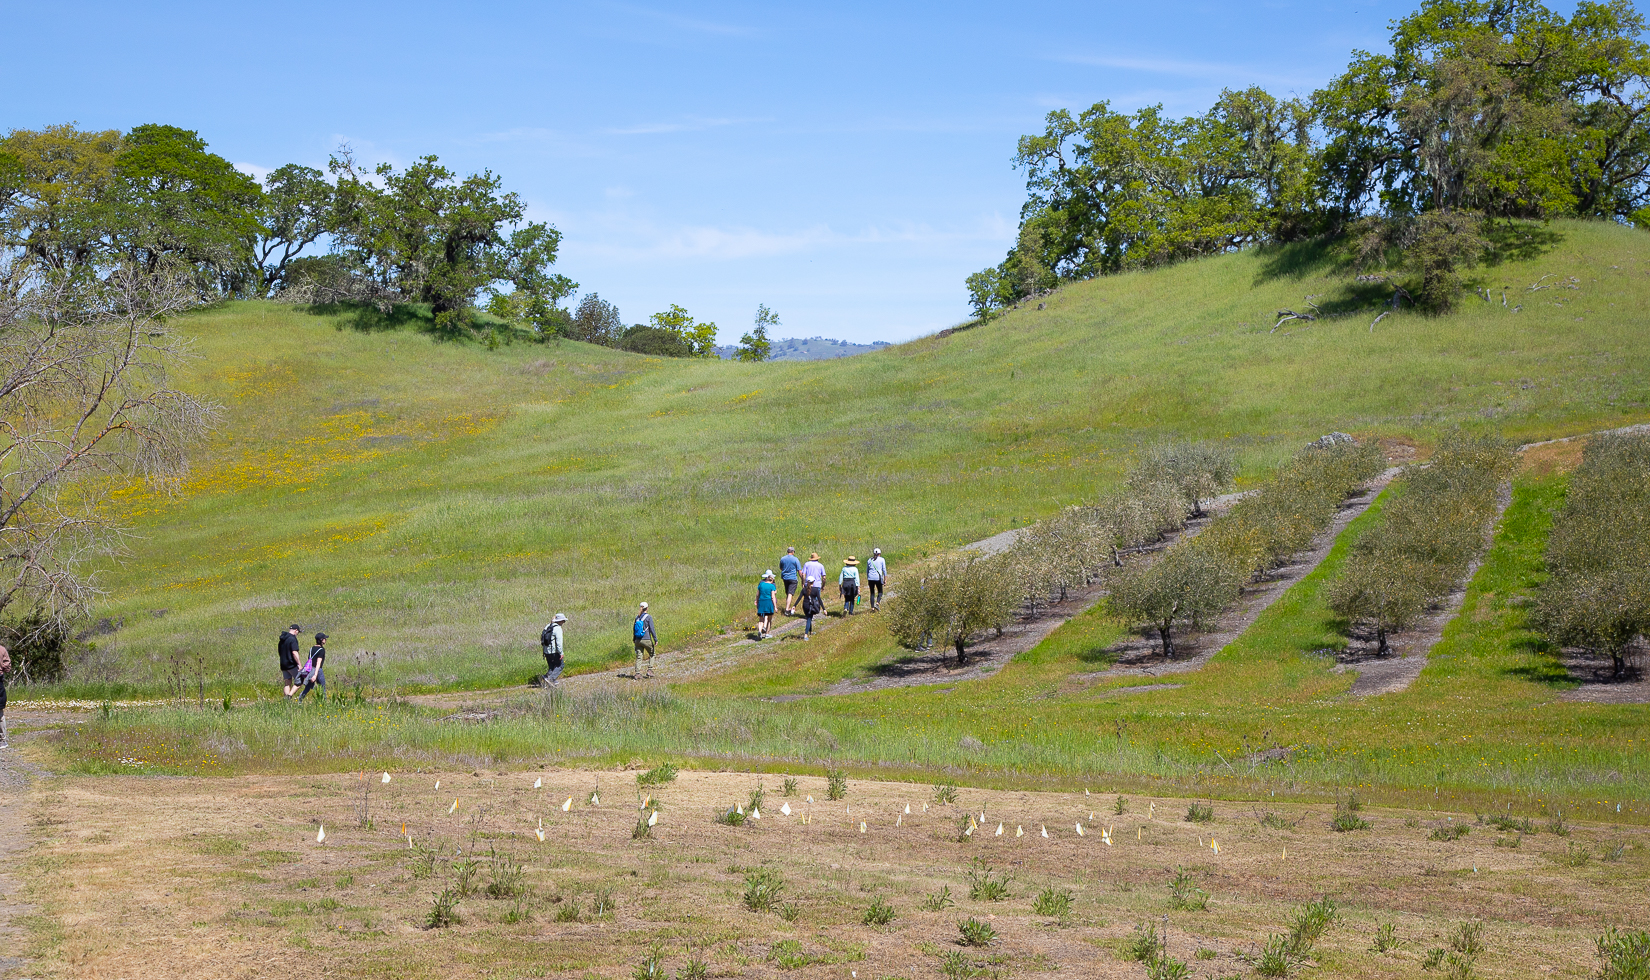 hikers walking through olive groves and pollinator gardens in springtime